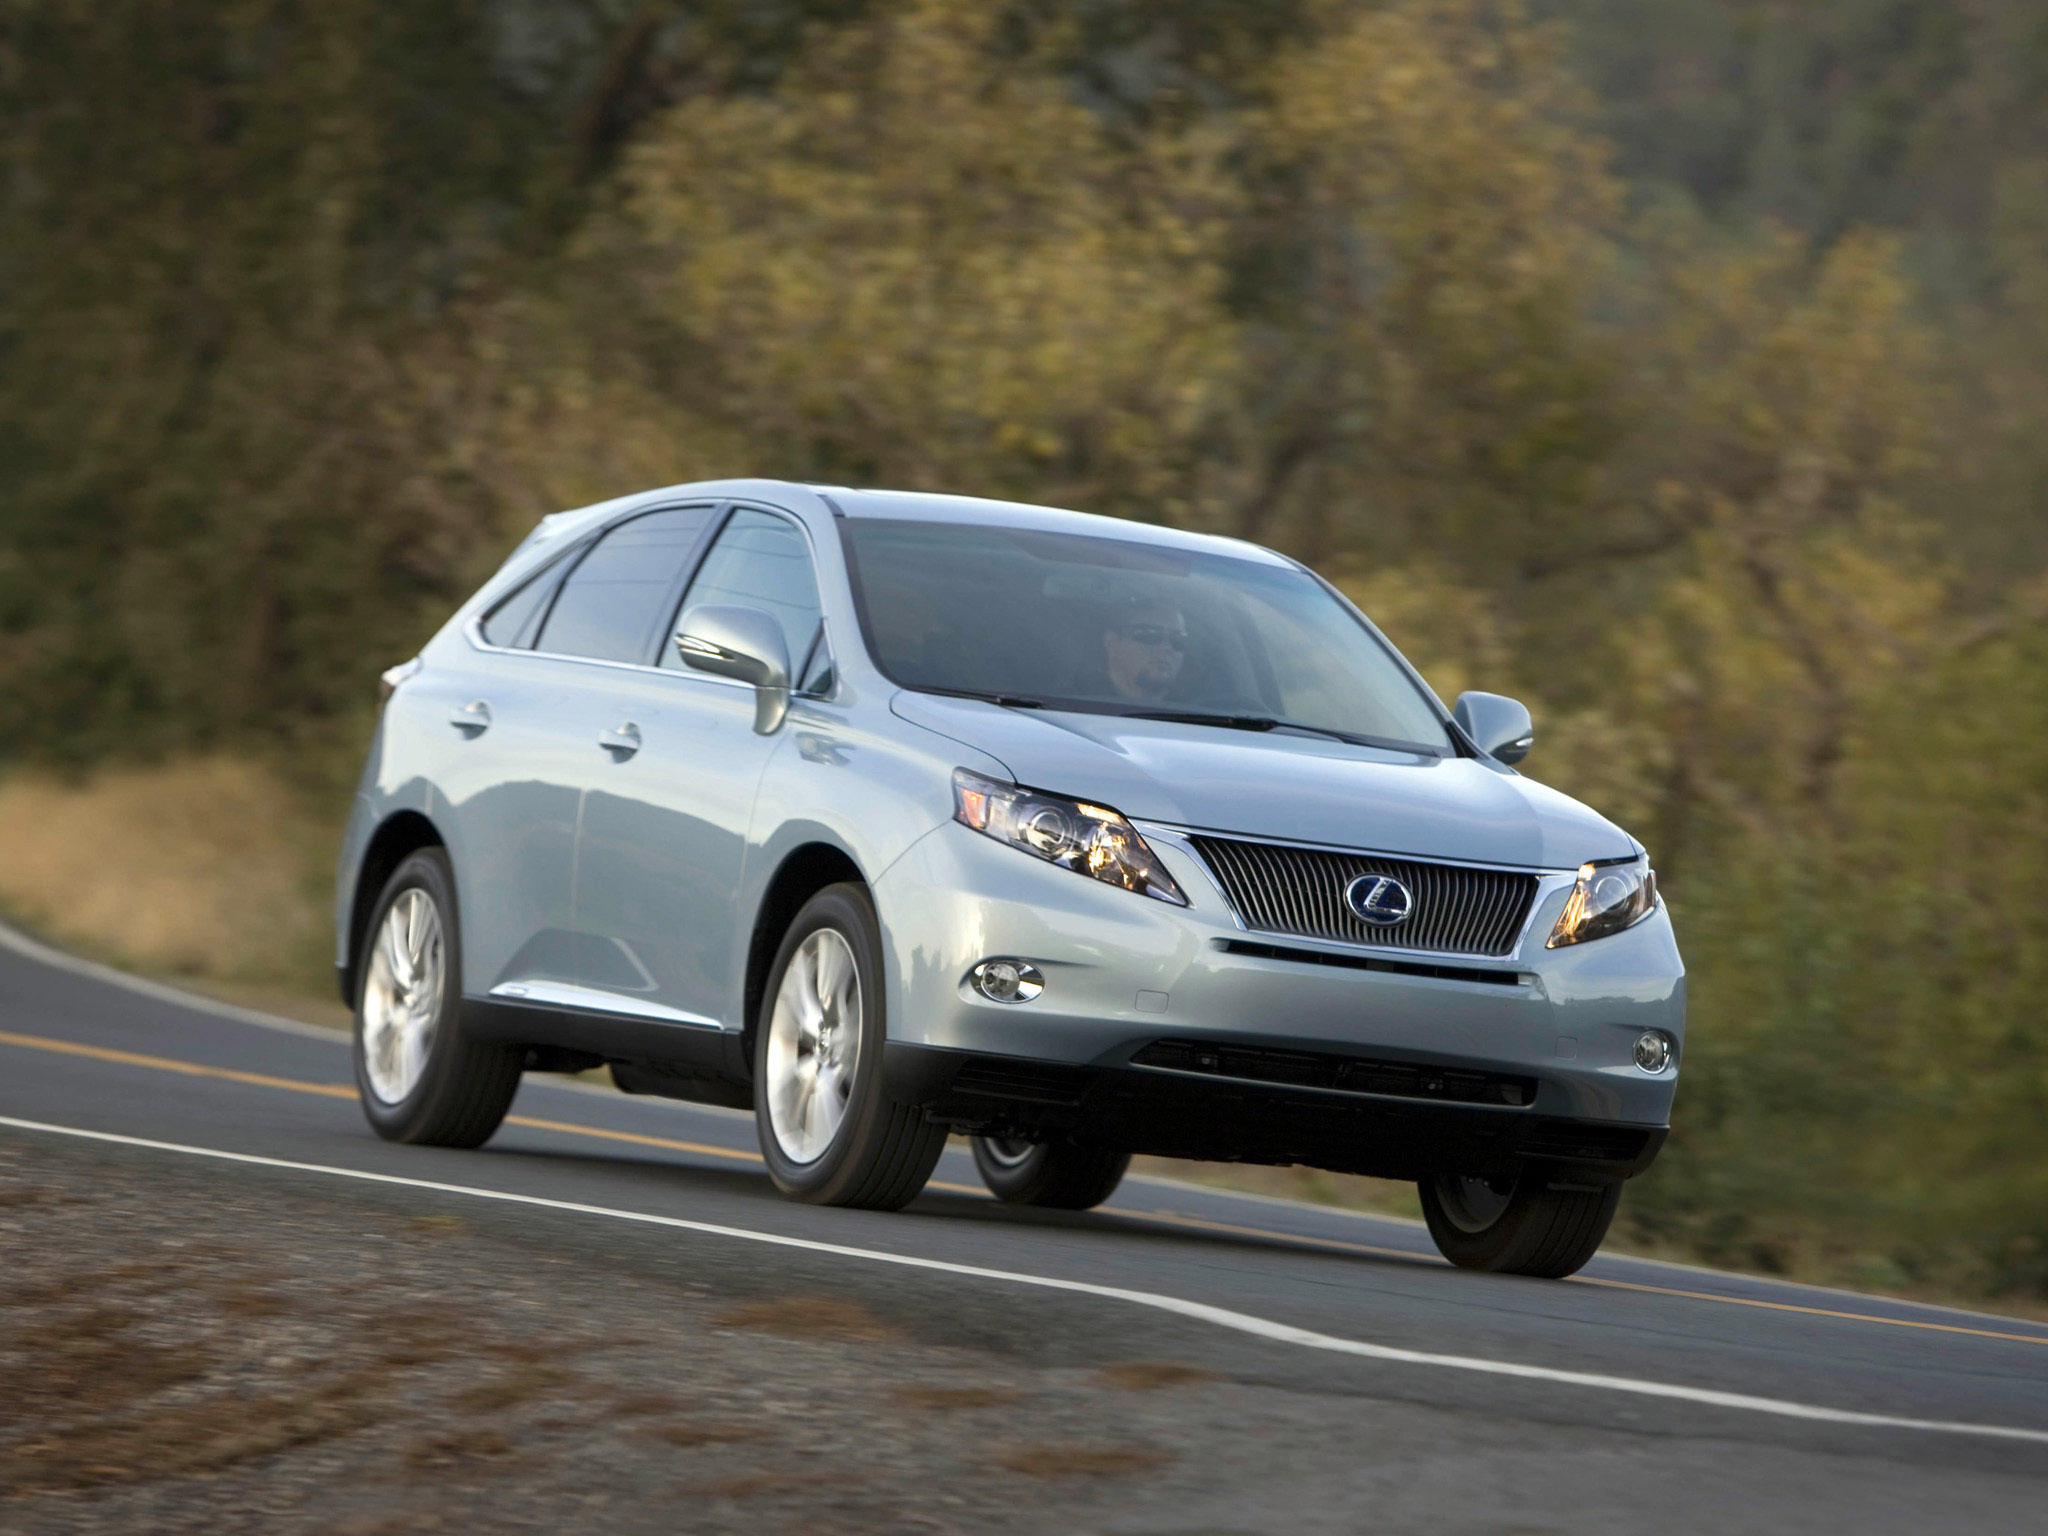 Car in pictures car photo gallery » Lexus RX 450h 2009